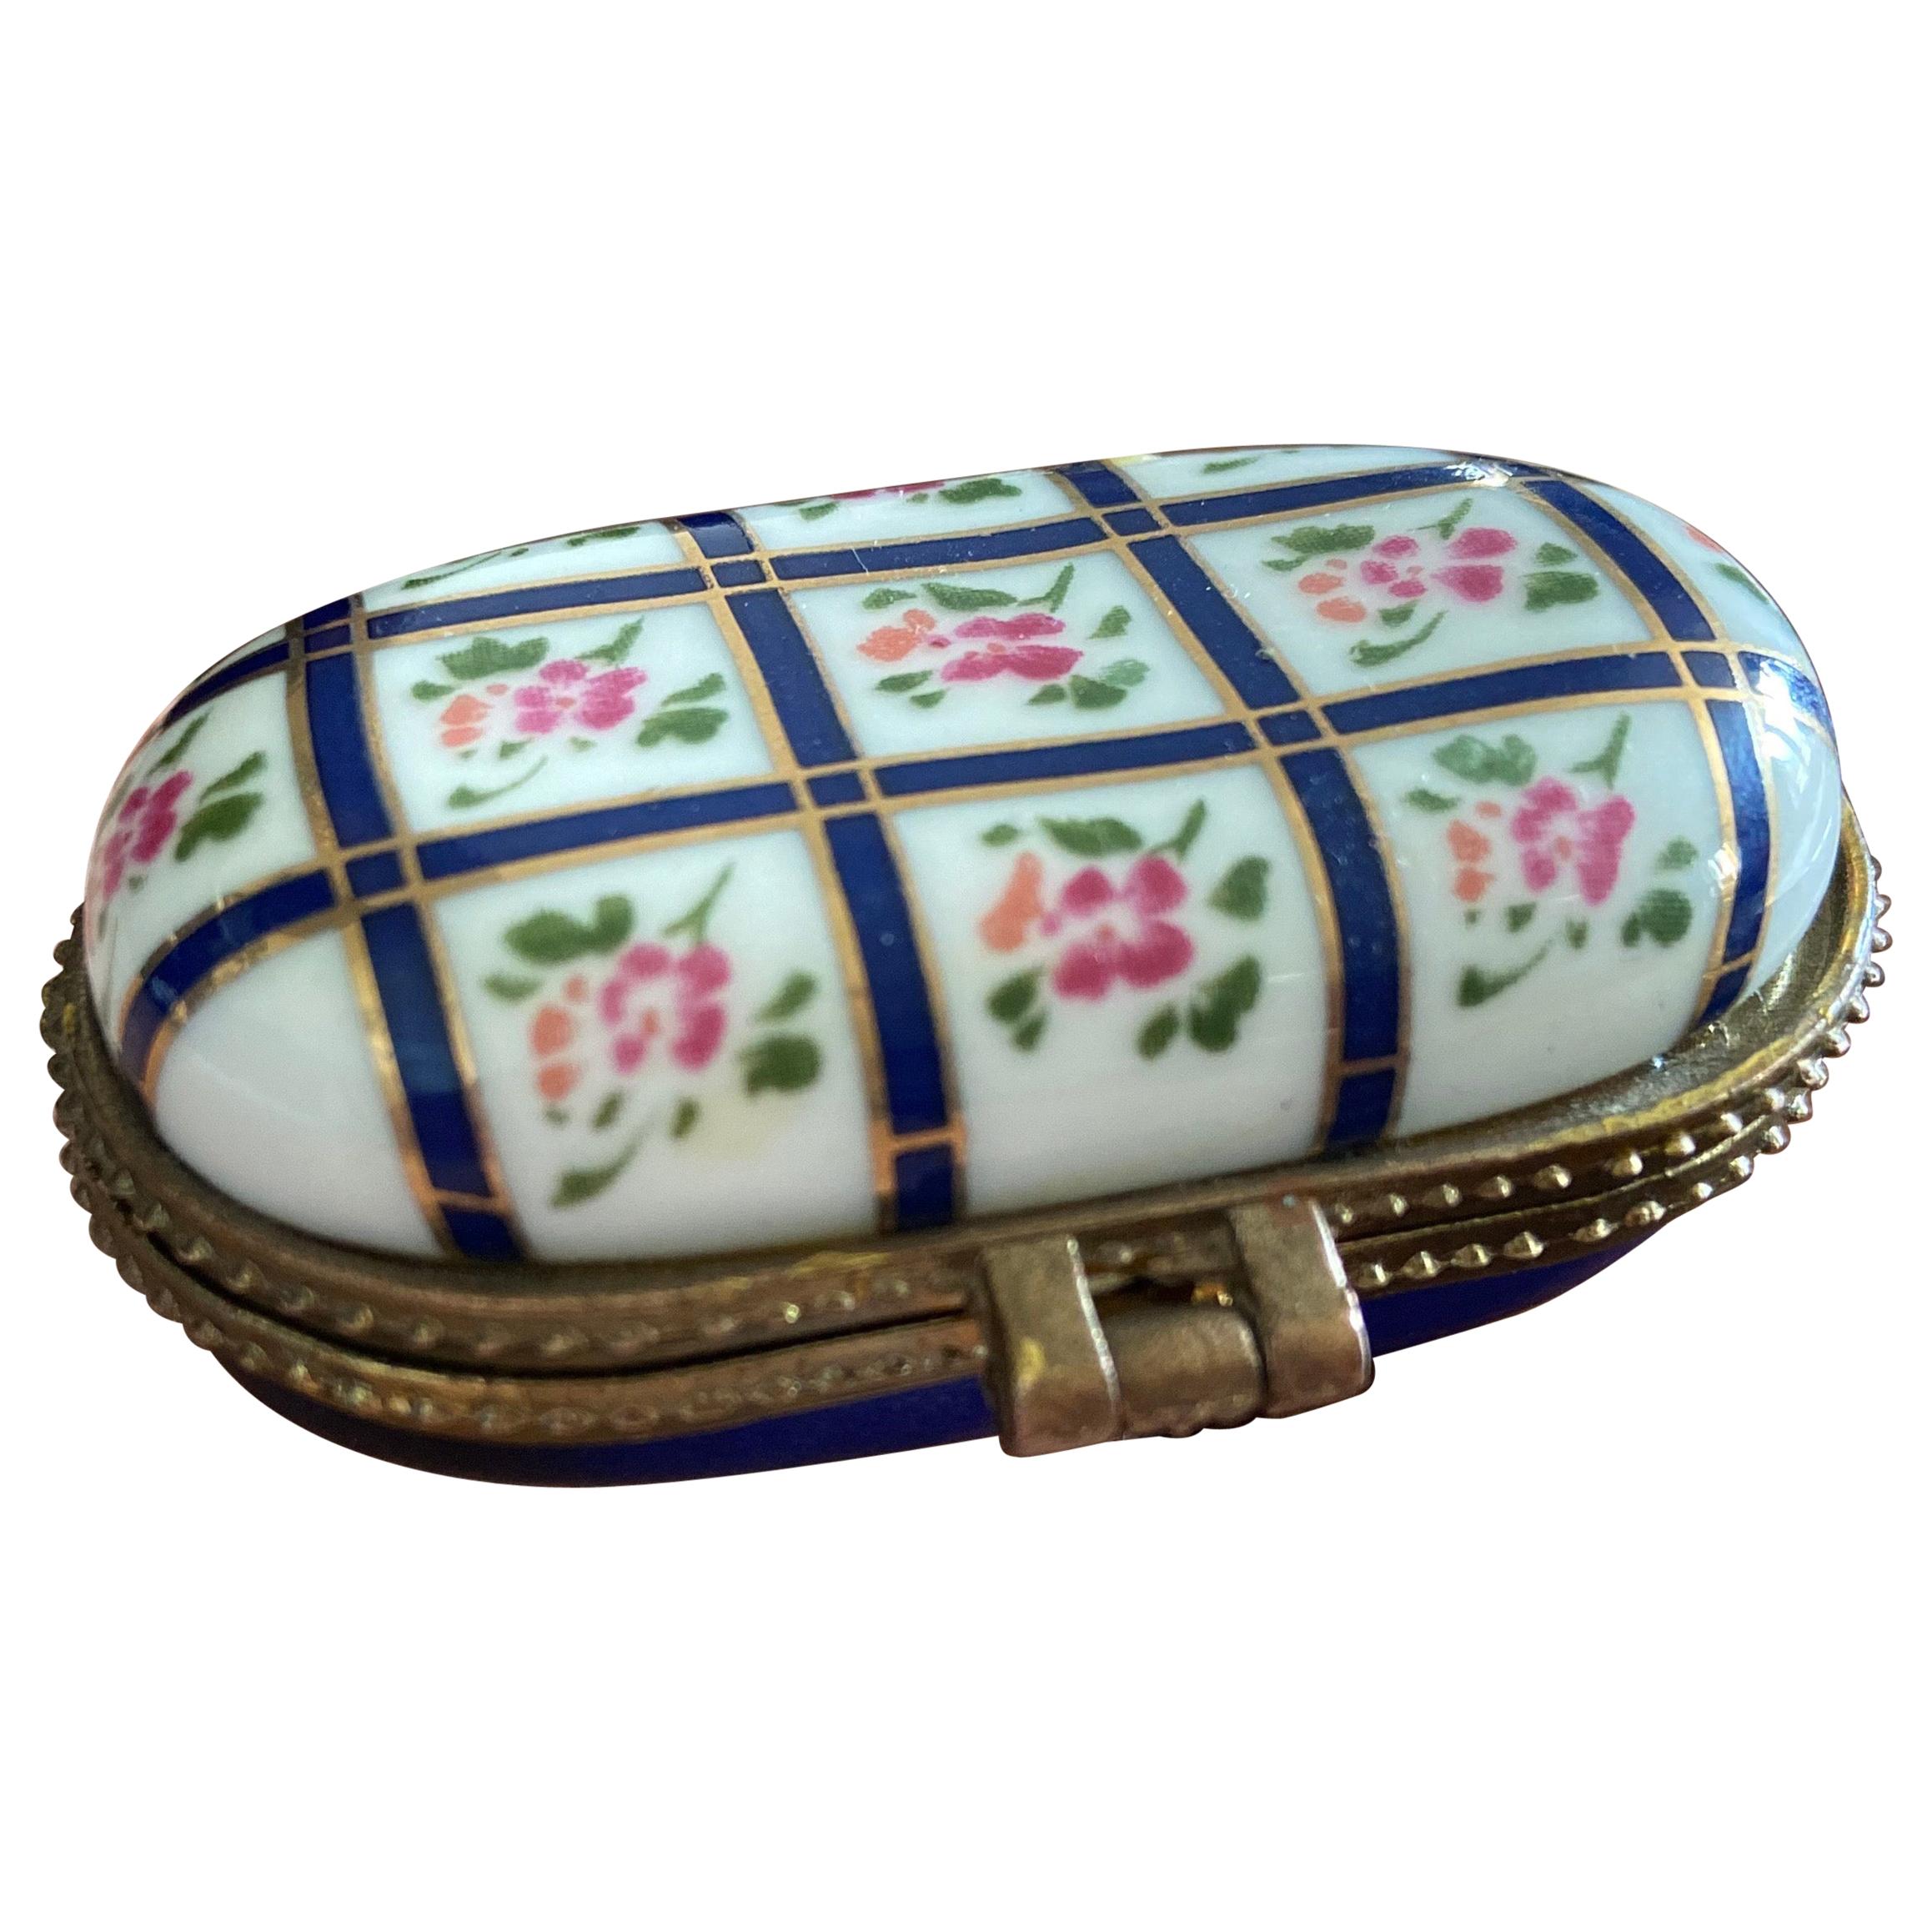 19th Century French Porcelain Hand Painted Jewellery Box by Porcelain Art